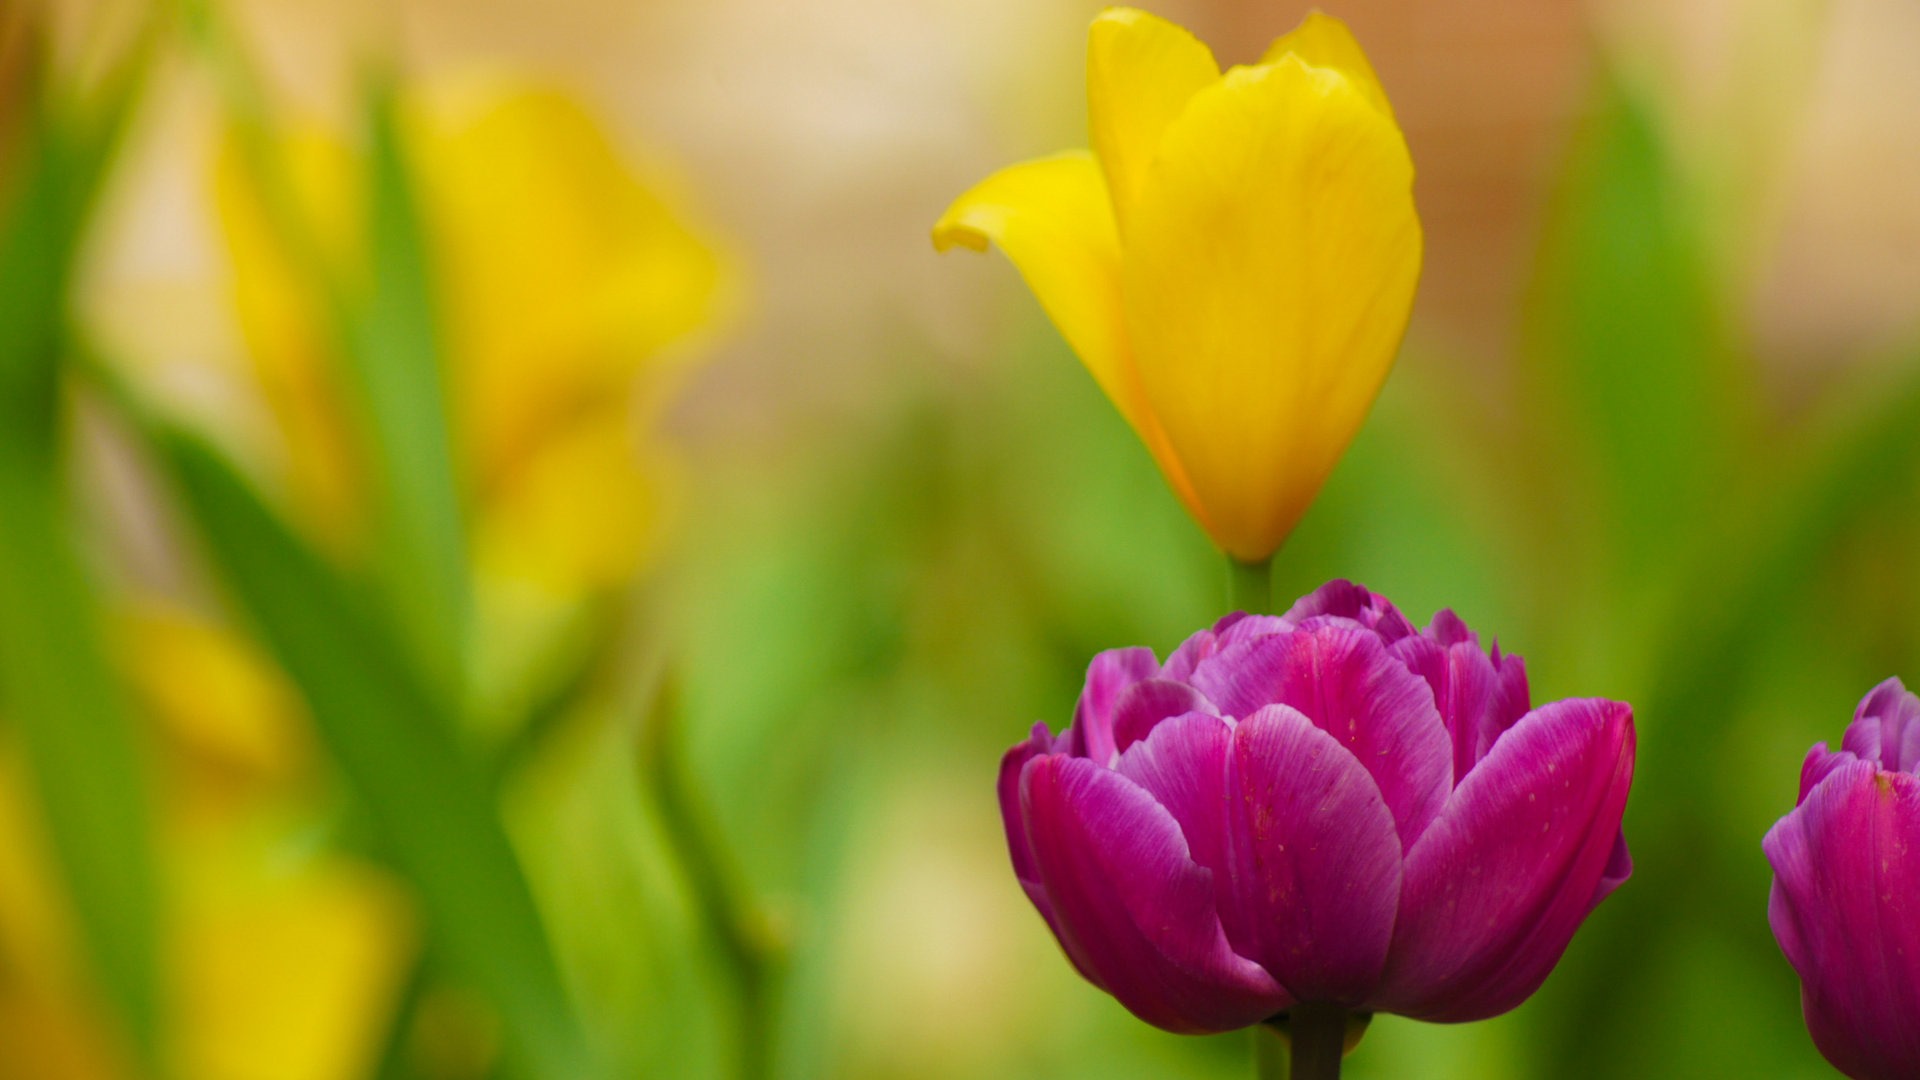 Fresh and colorful tulips flower HD wallpapers #15 - 1920x1080